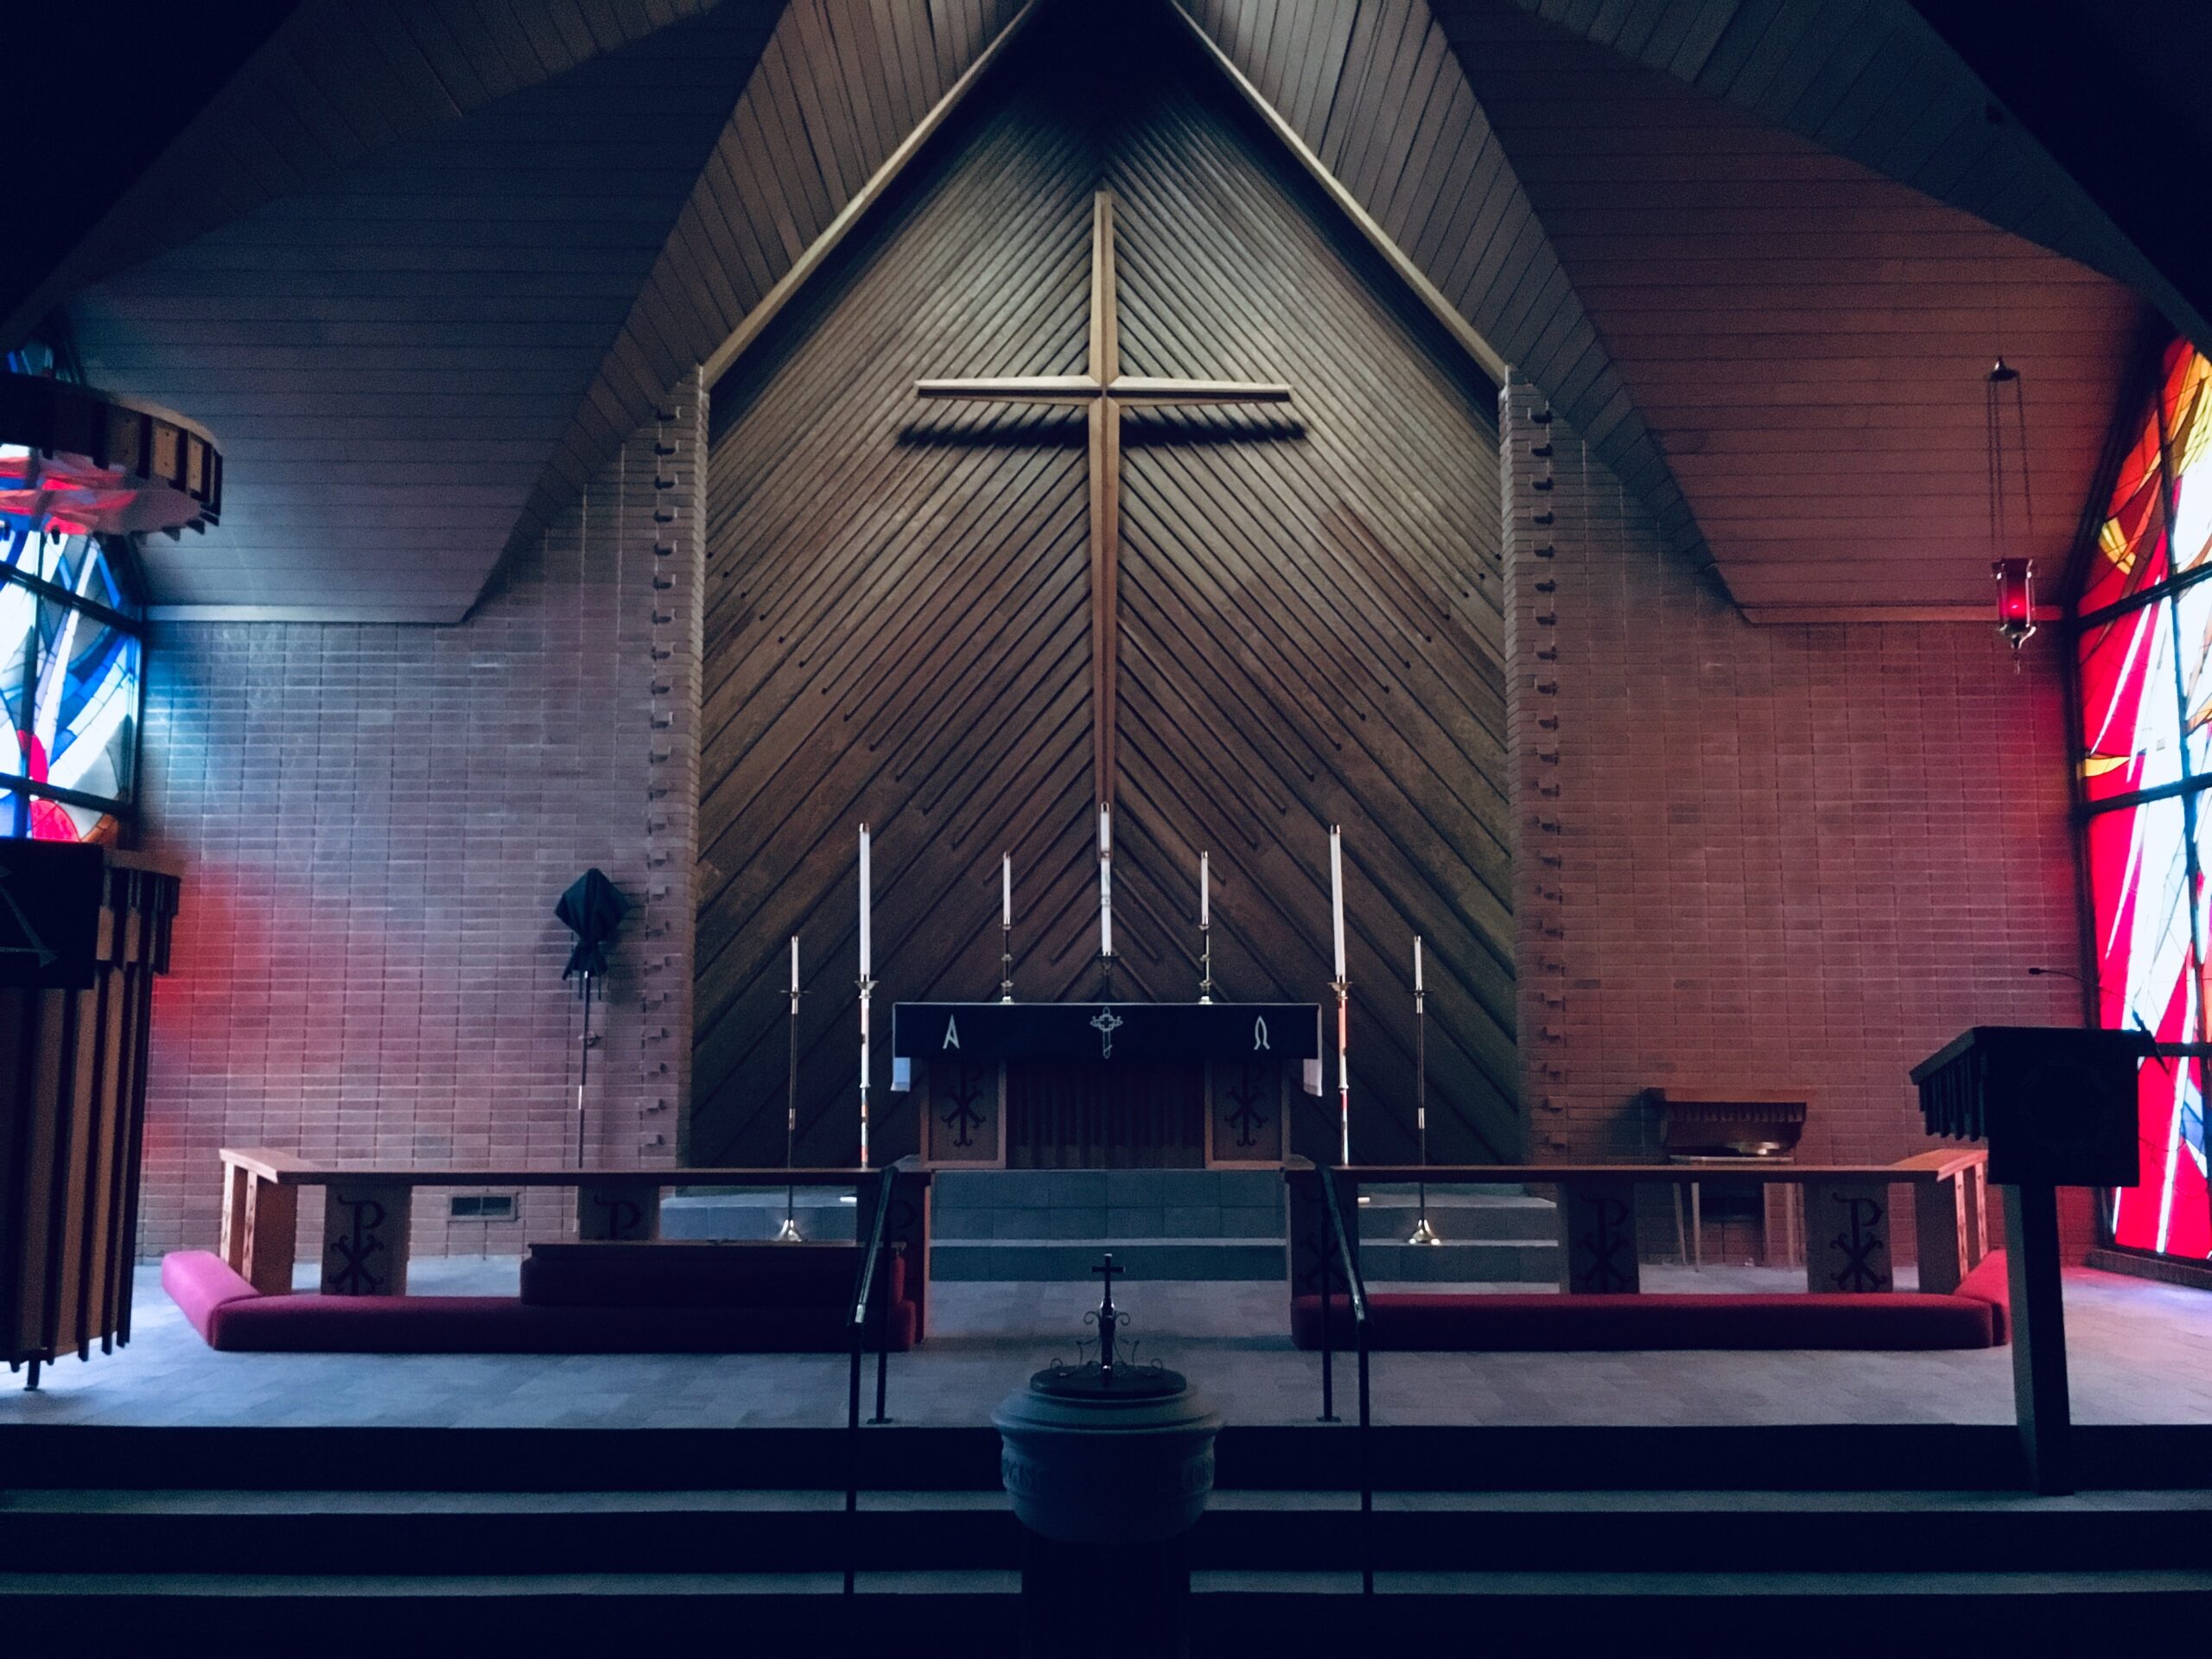 New Report Finds Christianity is Shrinking in the U.S.